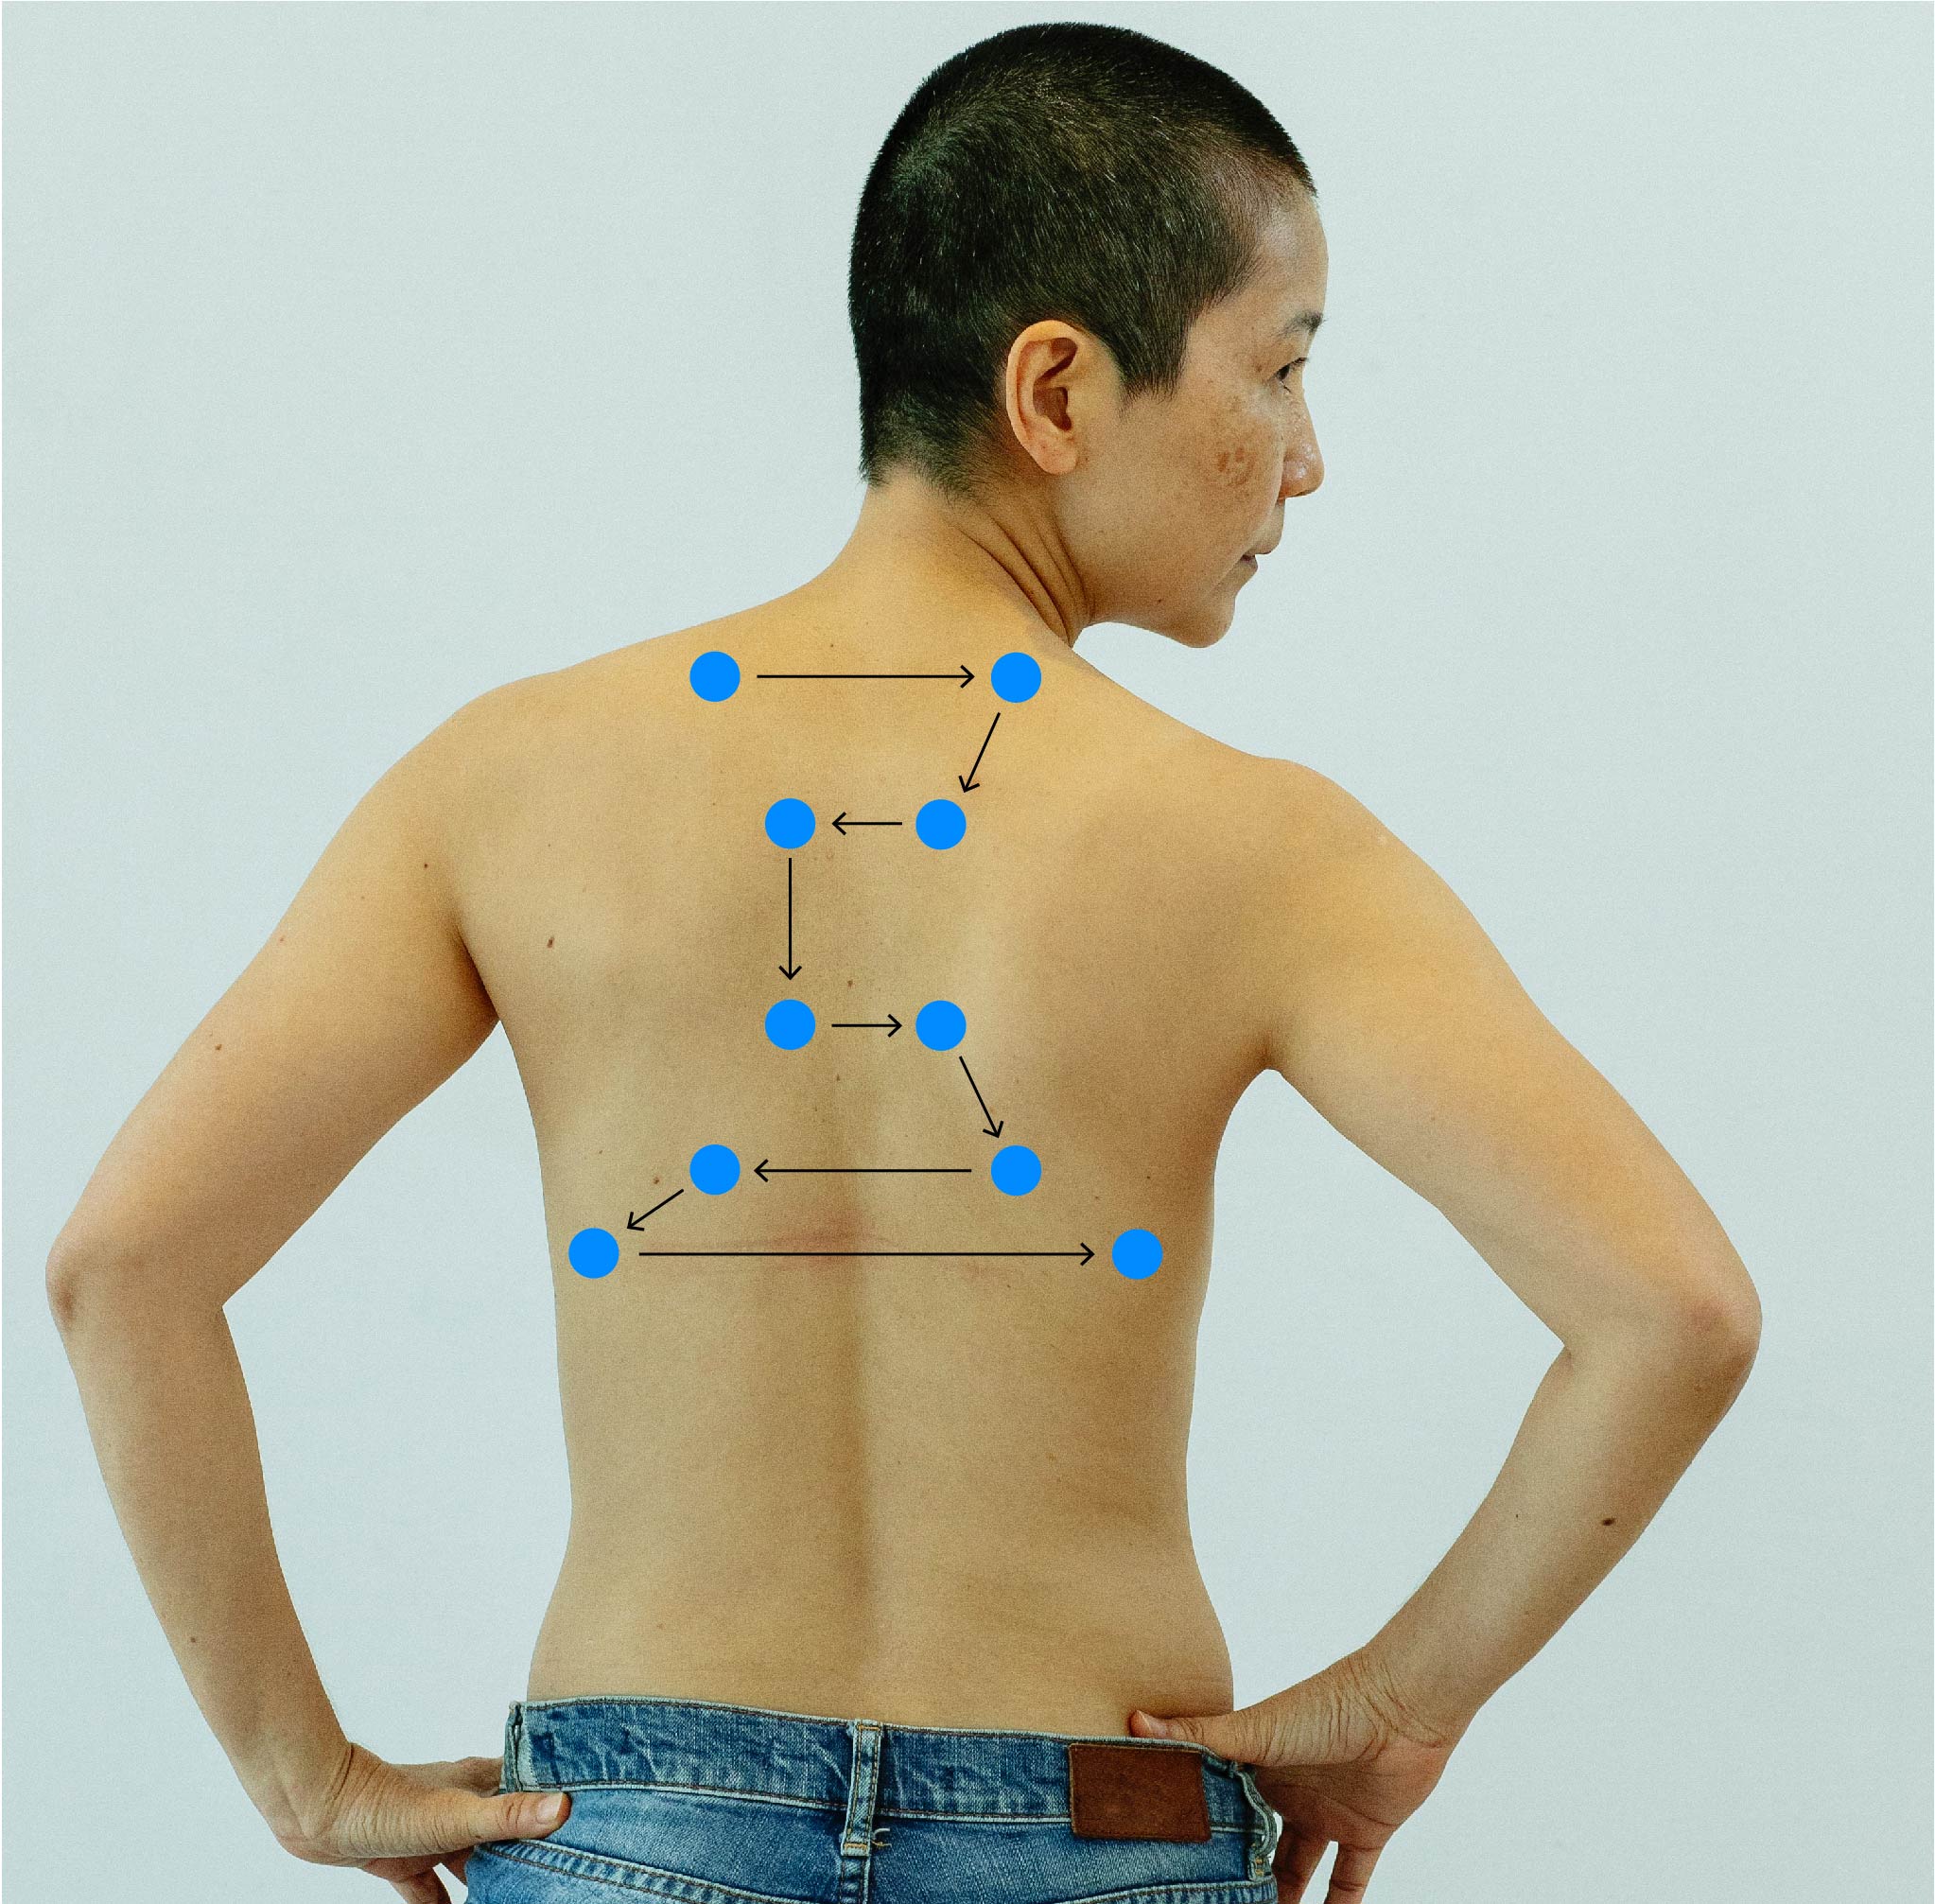 A person's posterior chest/thorax naked with blue dots drawn on top in the pattern of tactile fremitus.